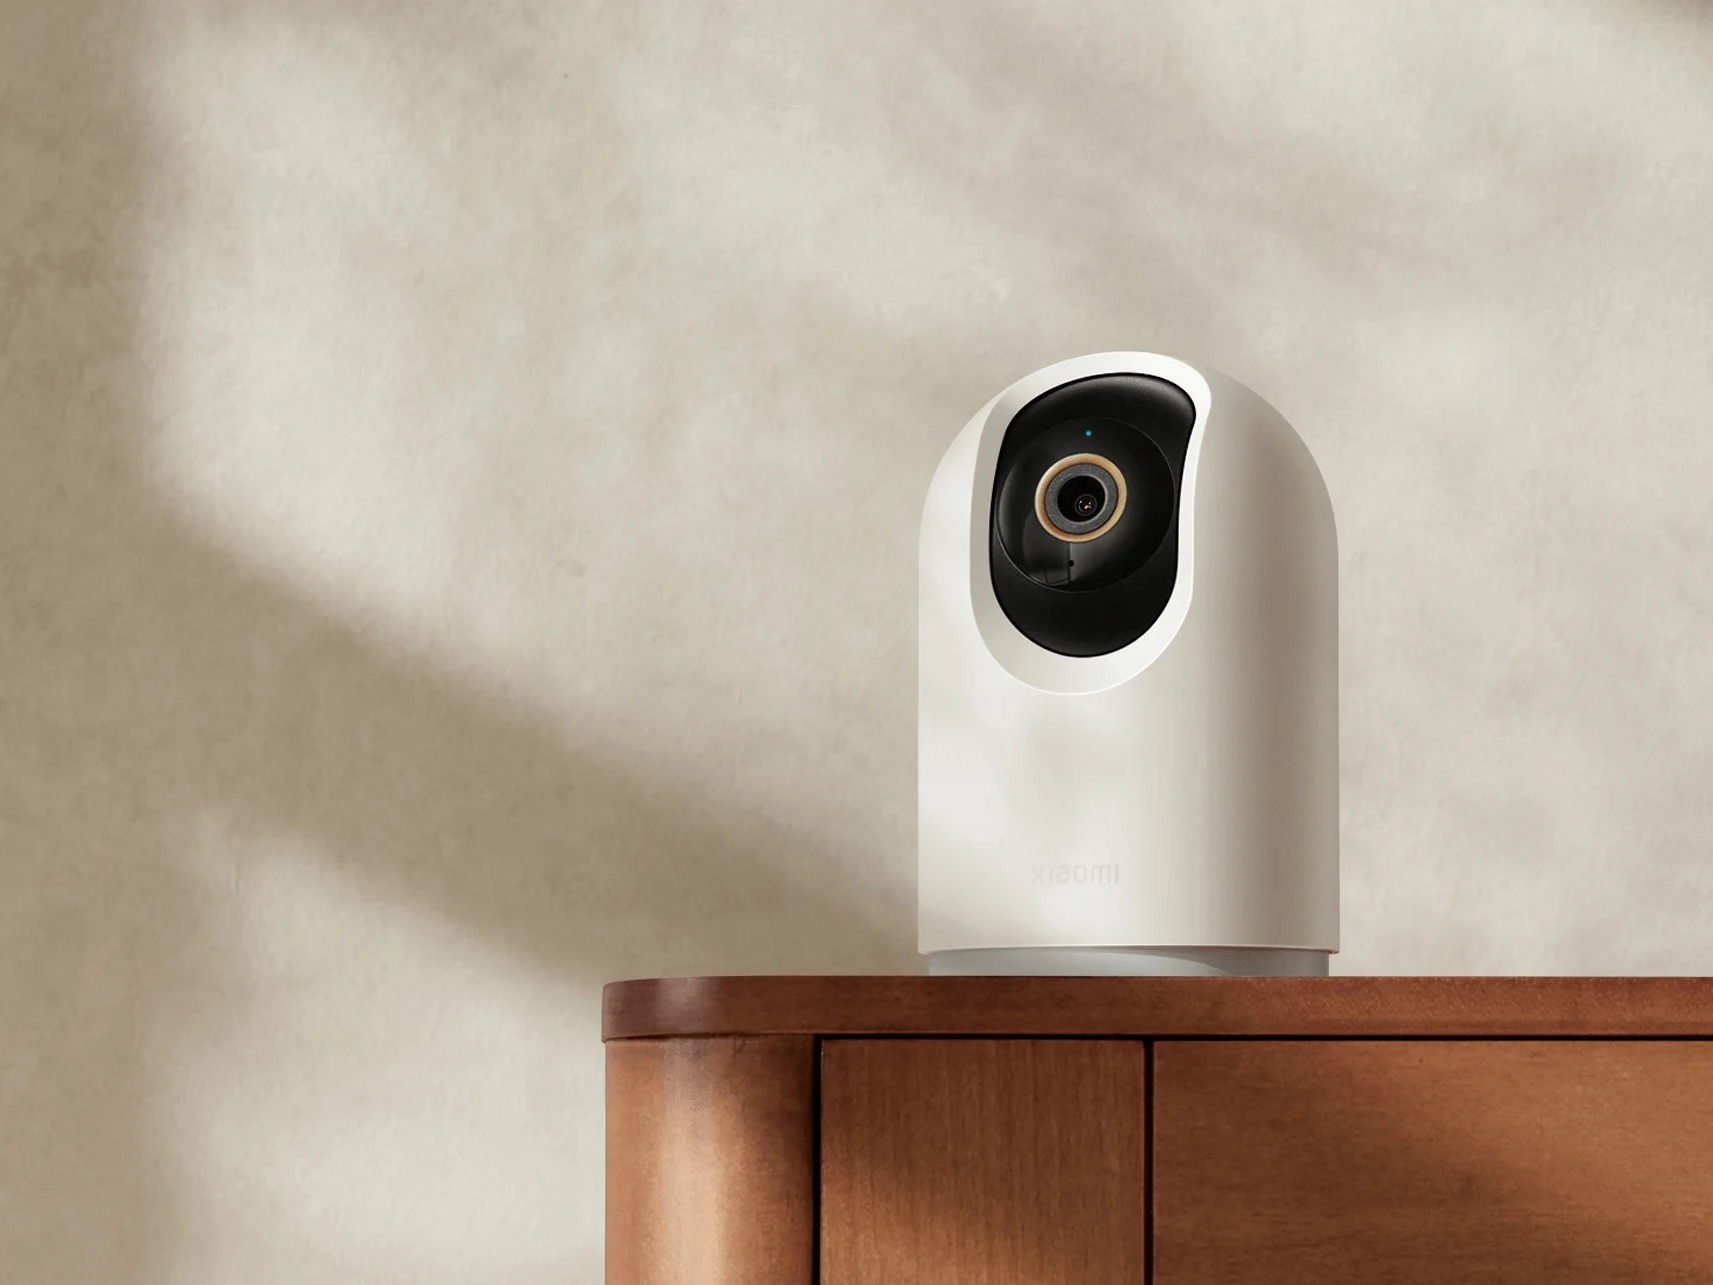 Xiaomi has unveiled the Smart Camera C500 Pro in Europe: a 3K camera with 360° rotation and two-way voice communication for €70